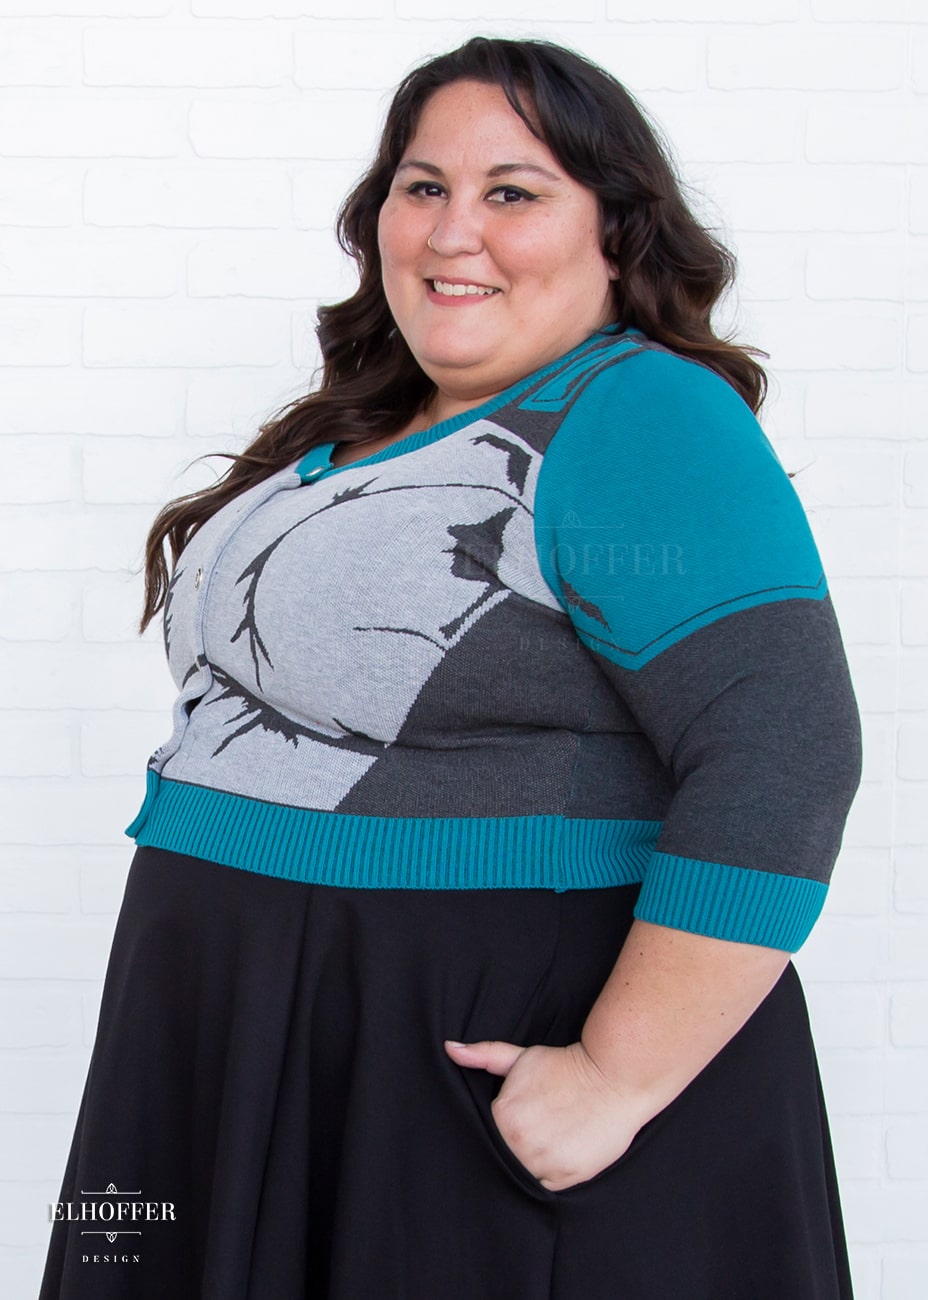 Alysia is modeling the Production 2XL. She has a 52” Chest, 46” Waist, 55” Hips, and is 5’4”.